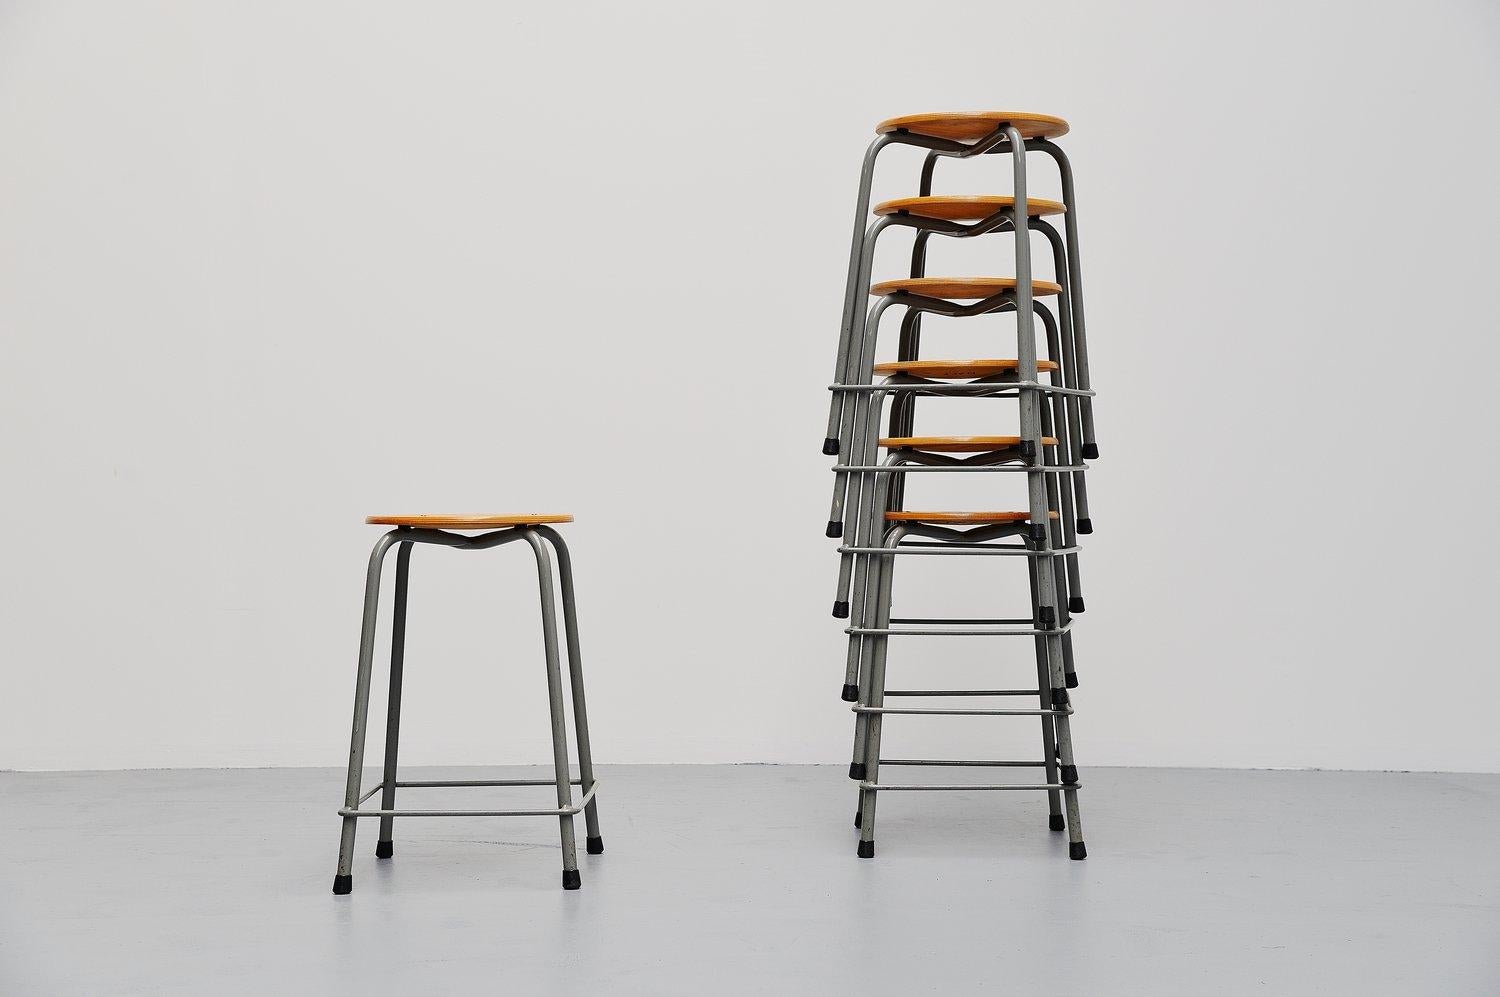 Very nice and large set of stools made by Ahrend de Cirkel, Holland, 1970. These stools have a very nice industrial grey lacquered tubular metal frame and a round birch plywood seat. The stools are stackable and we have a large set of 92 pieces